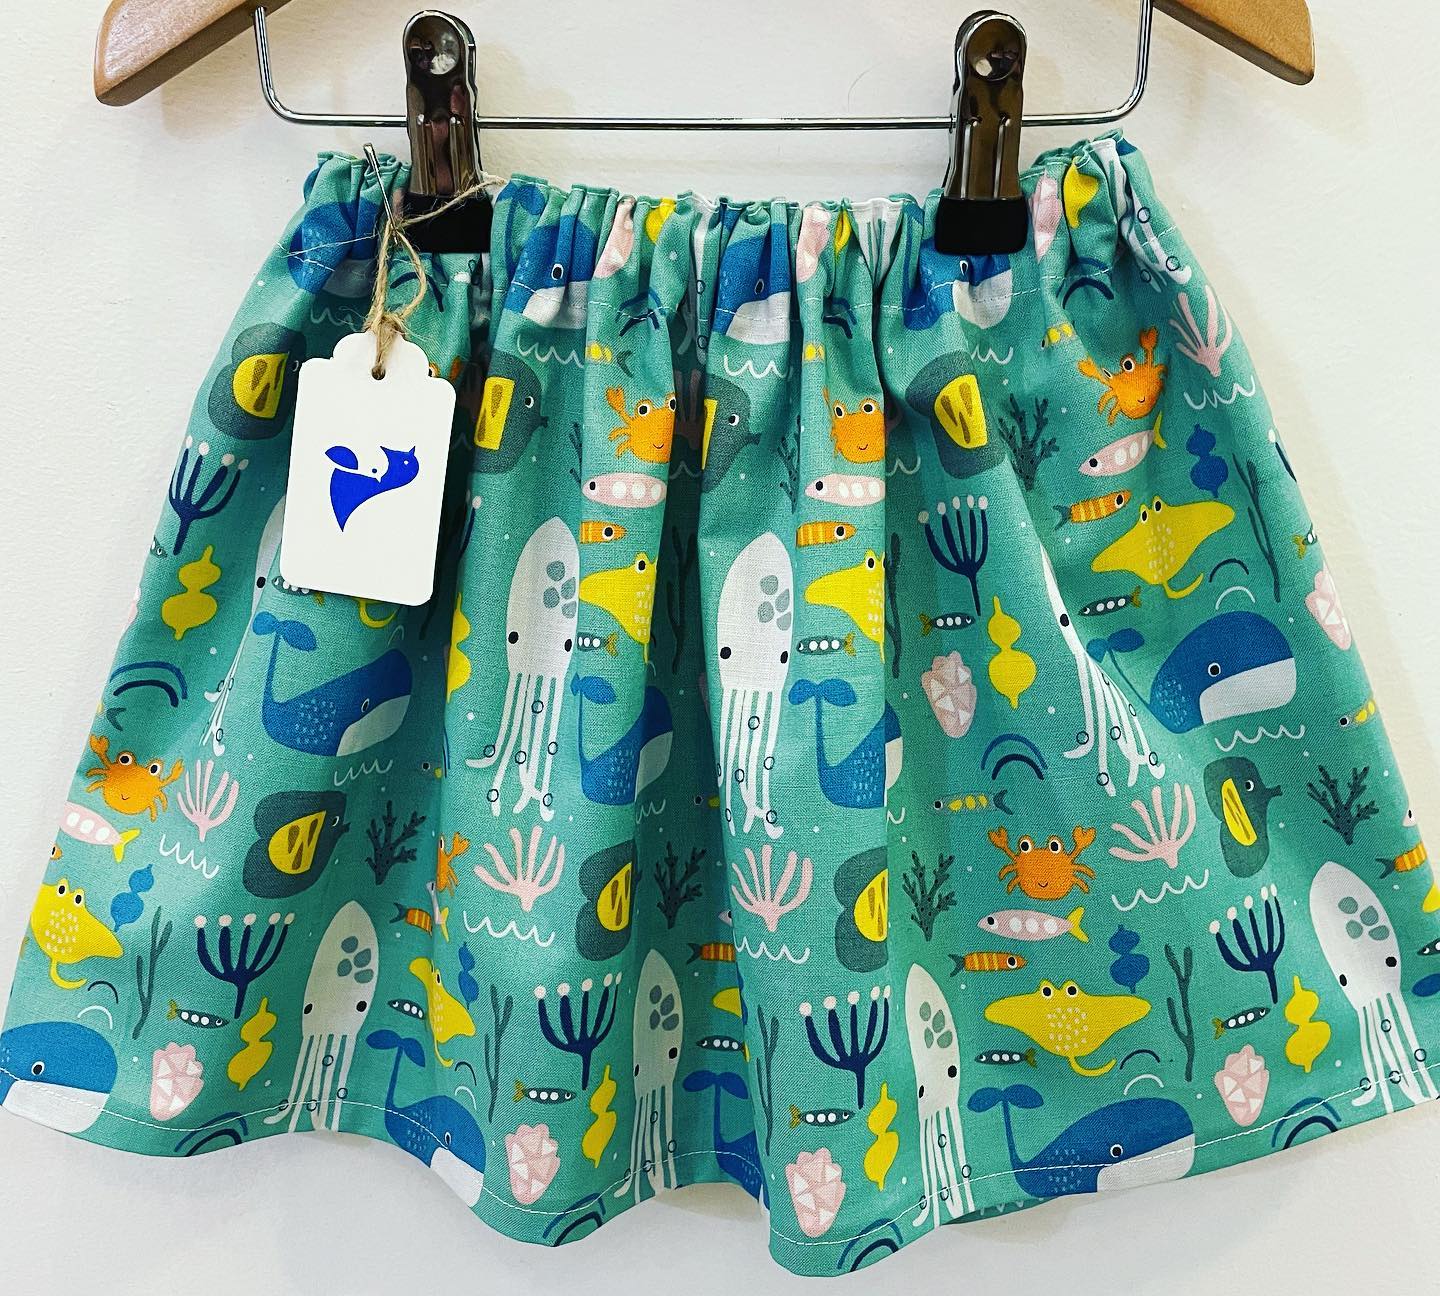 Robin and Bluebird Sea Life Skirt accessories and clothing